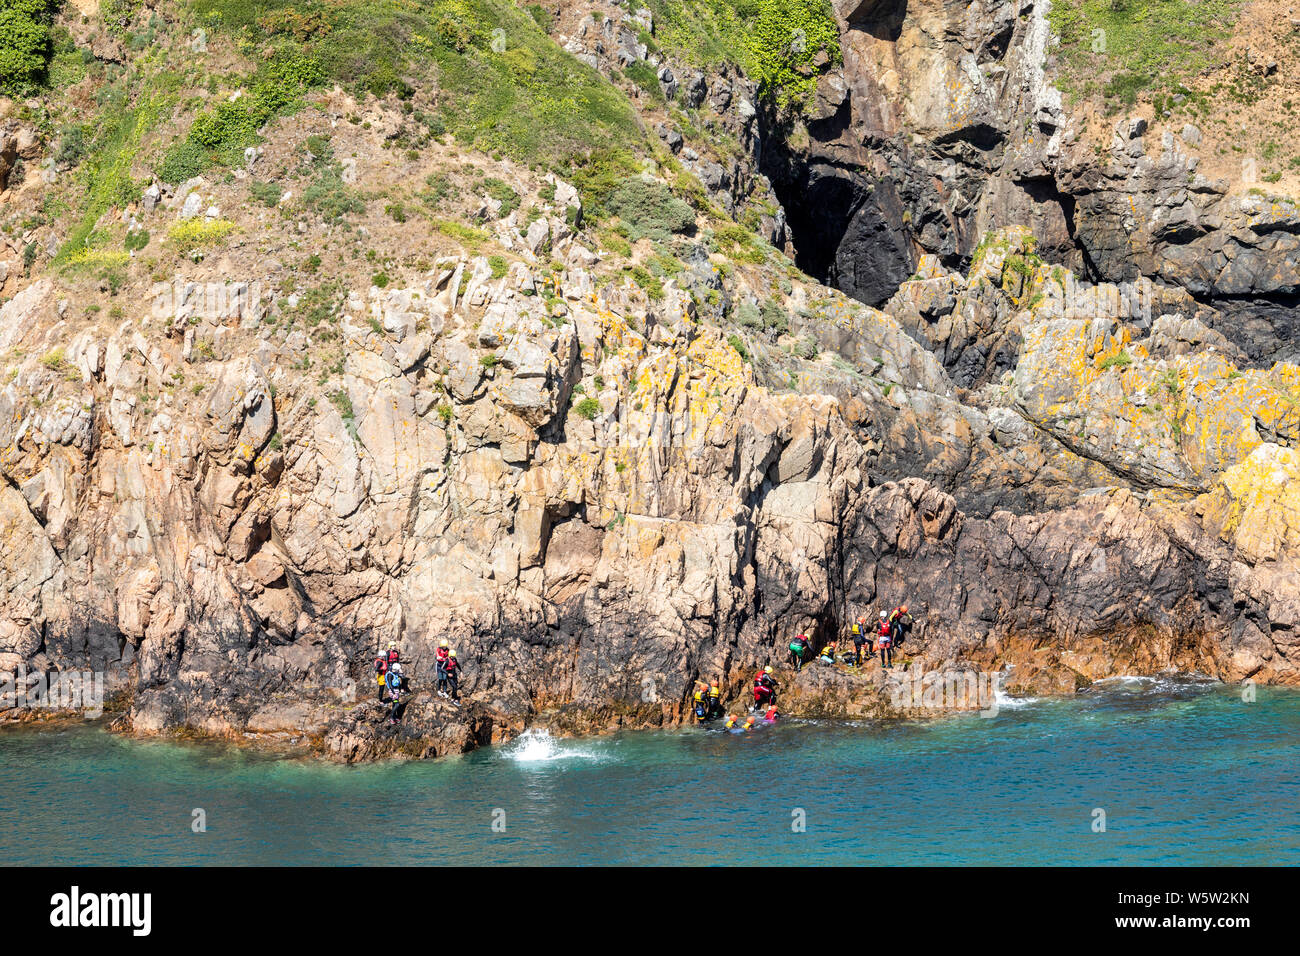 A group of young people coasteering below the cliffs at Pointe de la Moye, Le Gouffre, Les Villets on the beautiful, rugged south coast of Guernsey UK Stock Photo